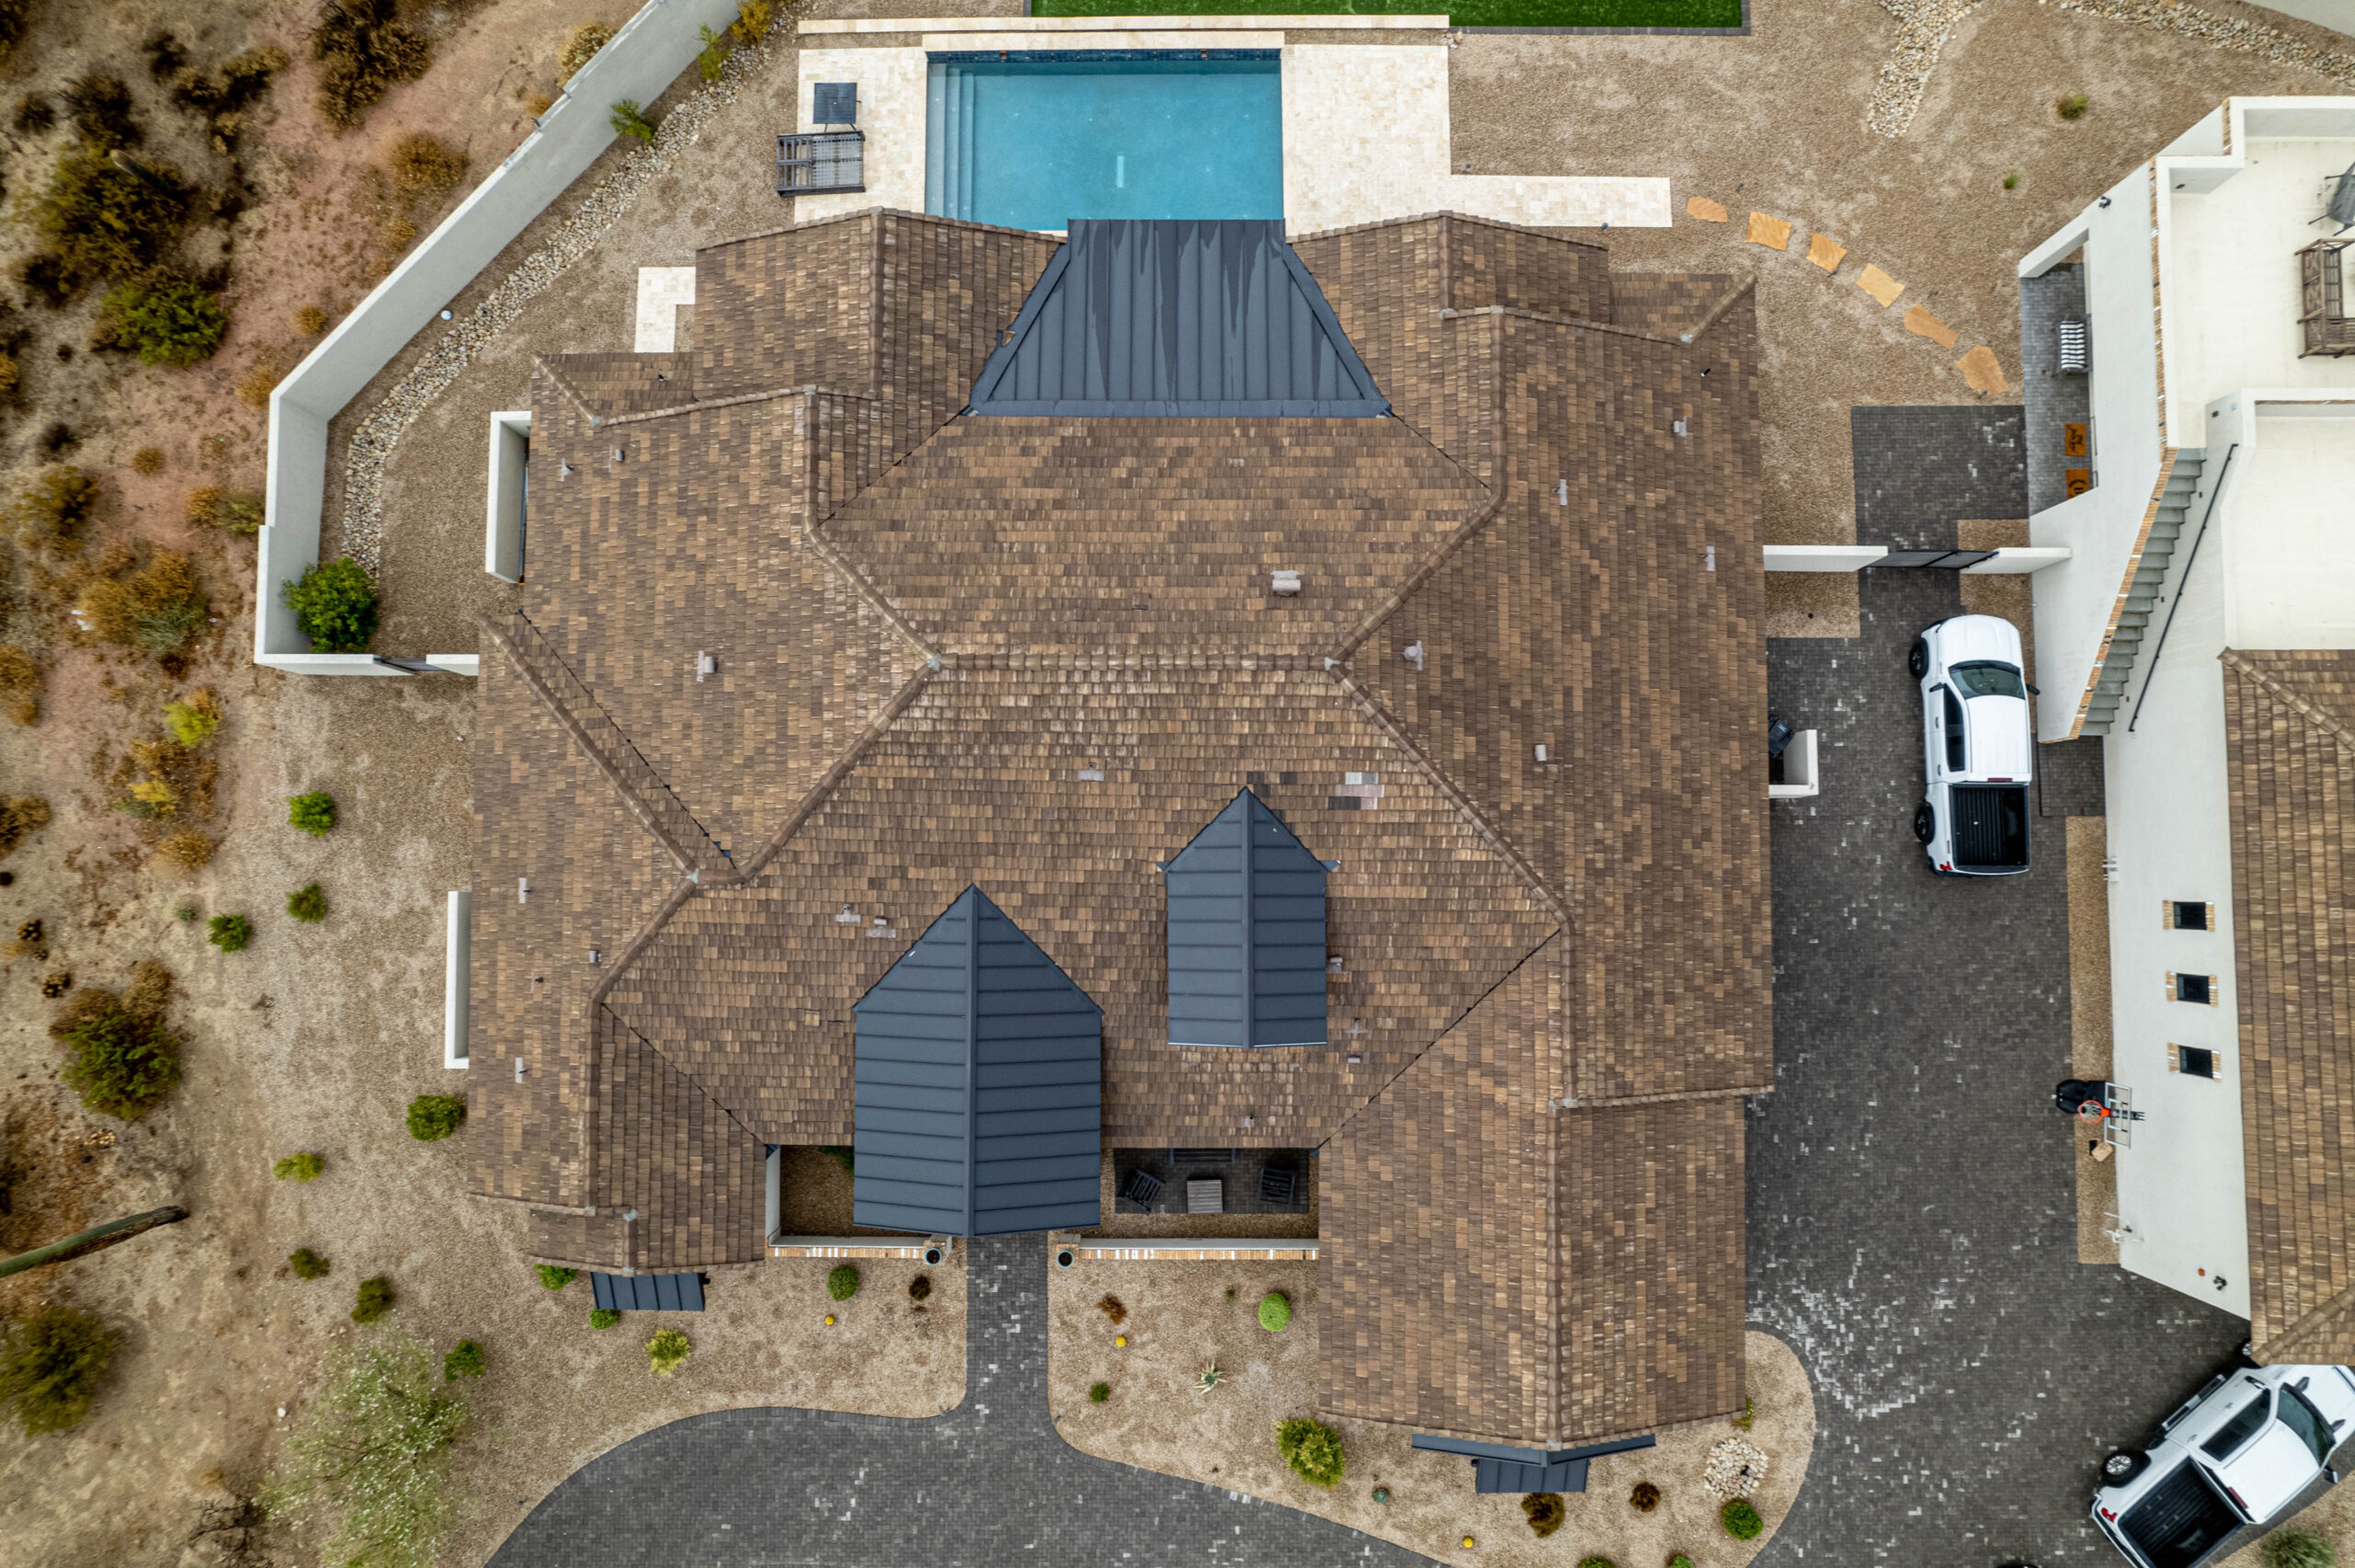 An aerial view of a house with a pool and spray foam roofing.